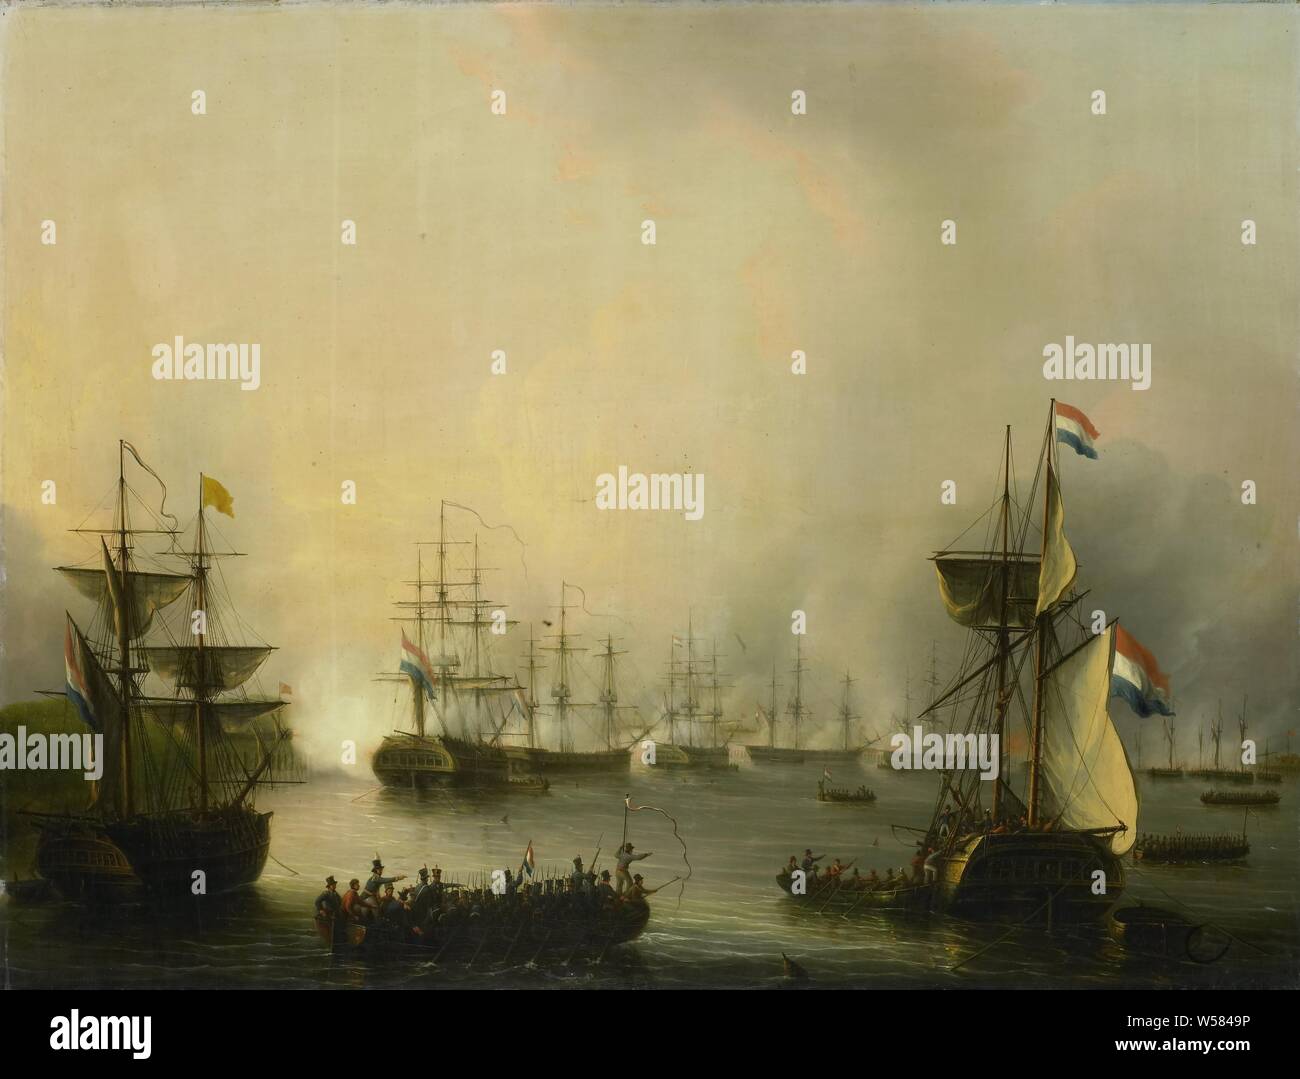 The Bombardment of Palembang, Sumatra, 24 June 1821, The shooting of Palembang on Sumatra on 24 June 1821 by the Dutch fleet. The Dutch warships lie off the coast of Sumatra, a few sloops sail between the ships., Martinus Schouman, 1821 - 1848, canvas, oil paint (paint), h 70.5 cm × w 93 cm × t 3.7 cm Stock Photo